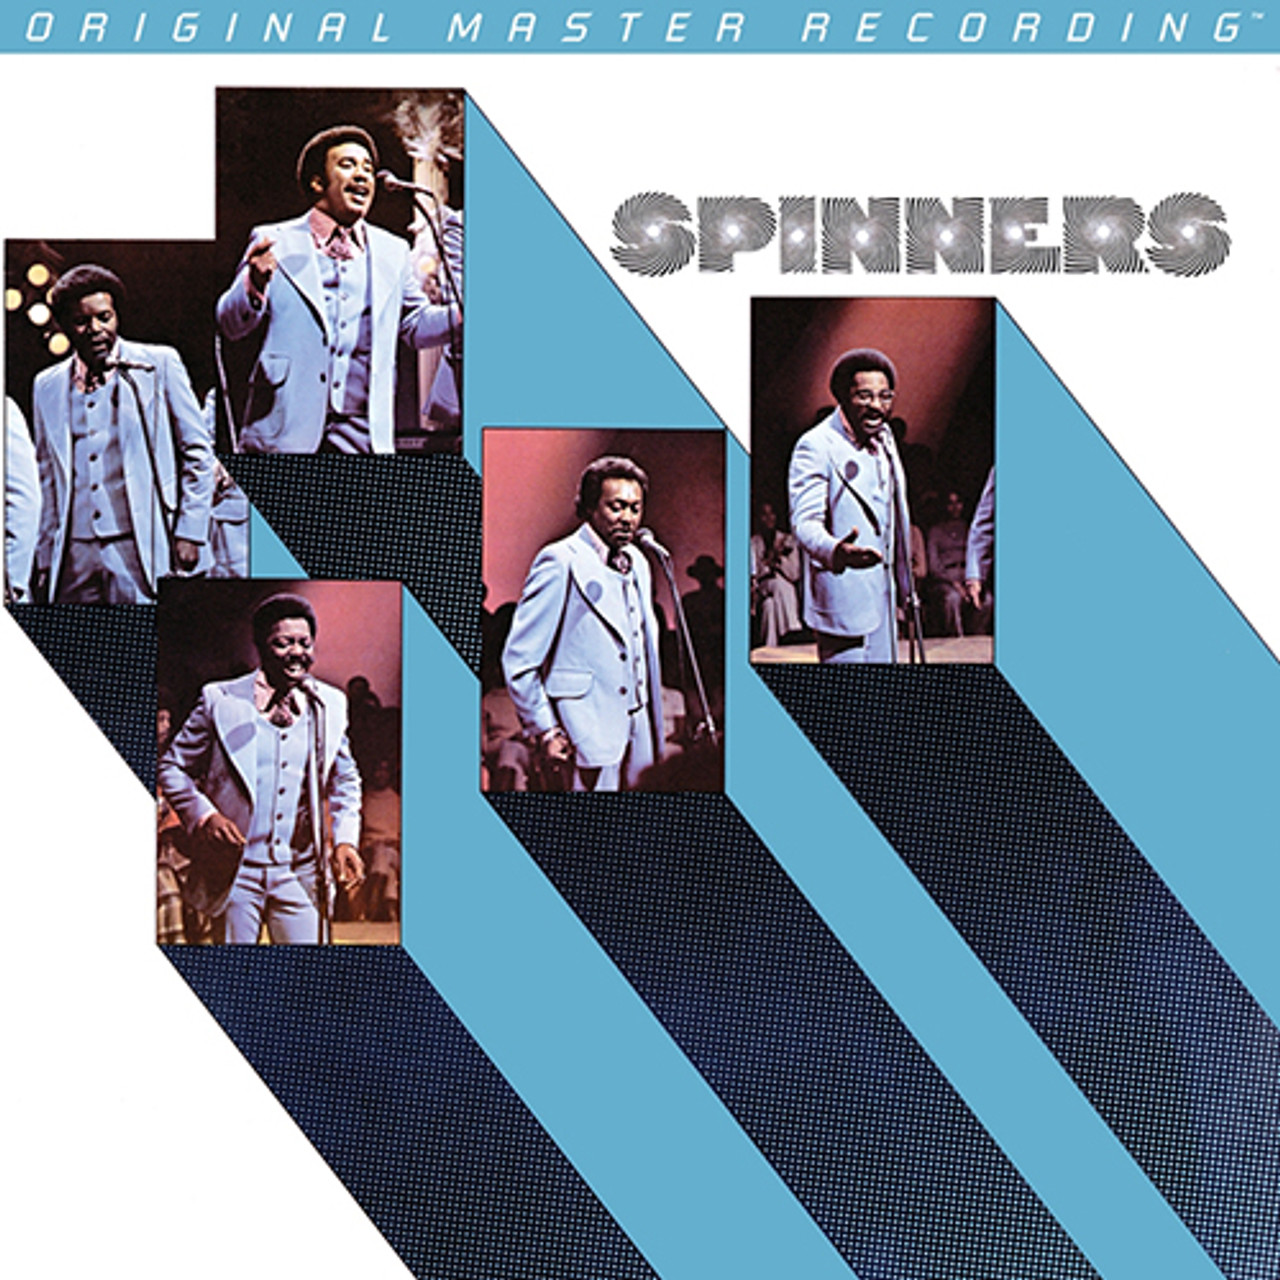 The Spinners - The Spinners (Numbered 180g Vinyl LP) - Music Direct